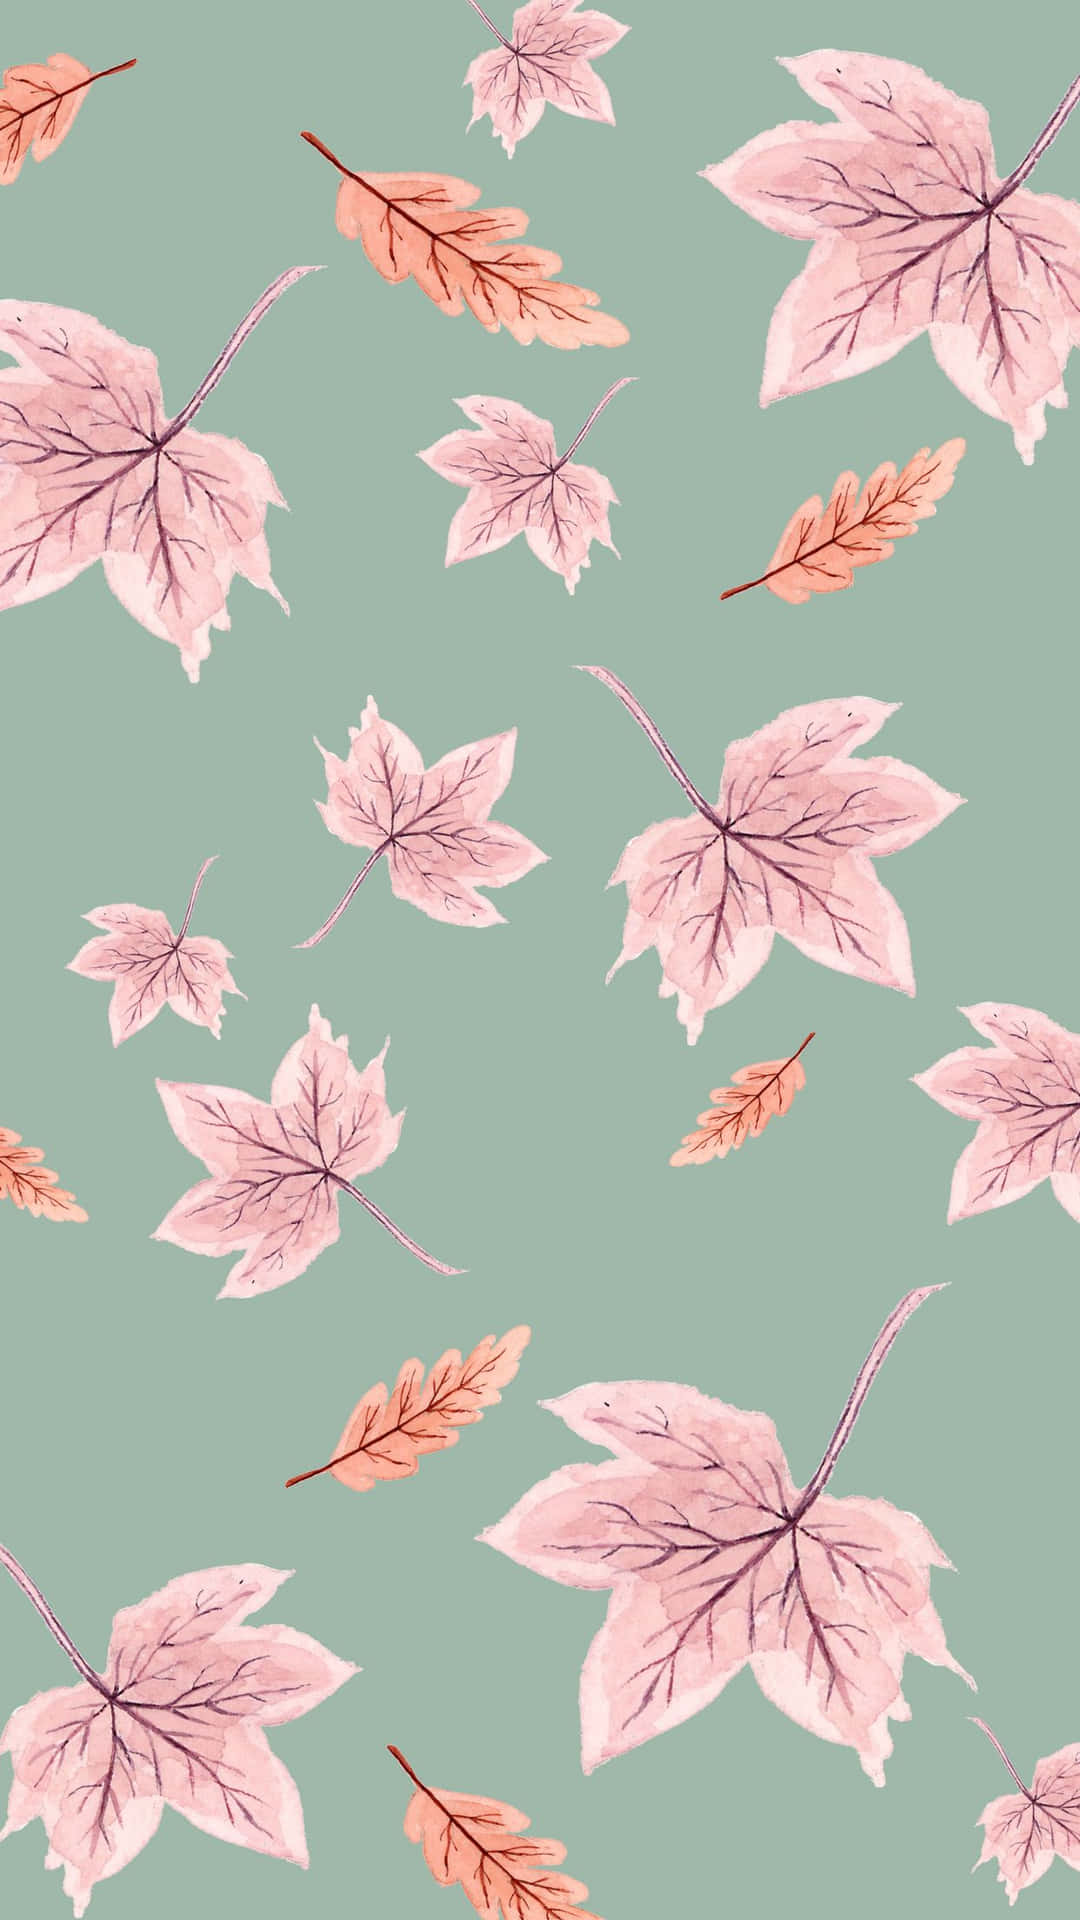 Enjoy the warmth and beauty of Pink Fall Wallpaper